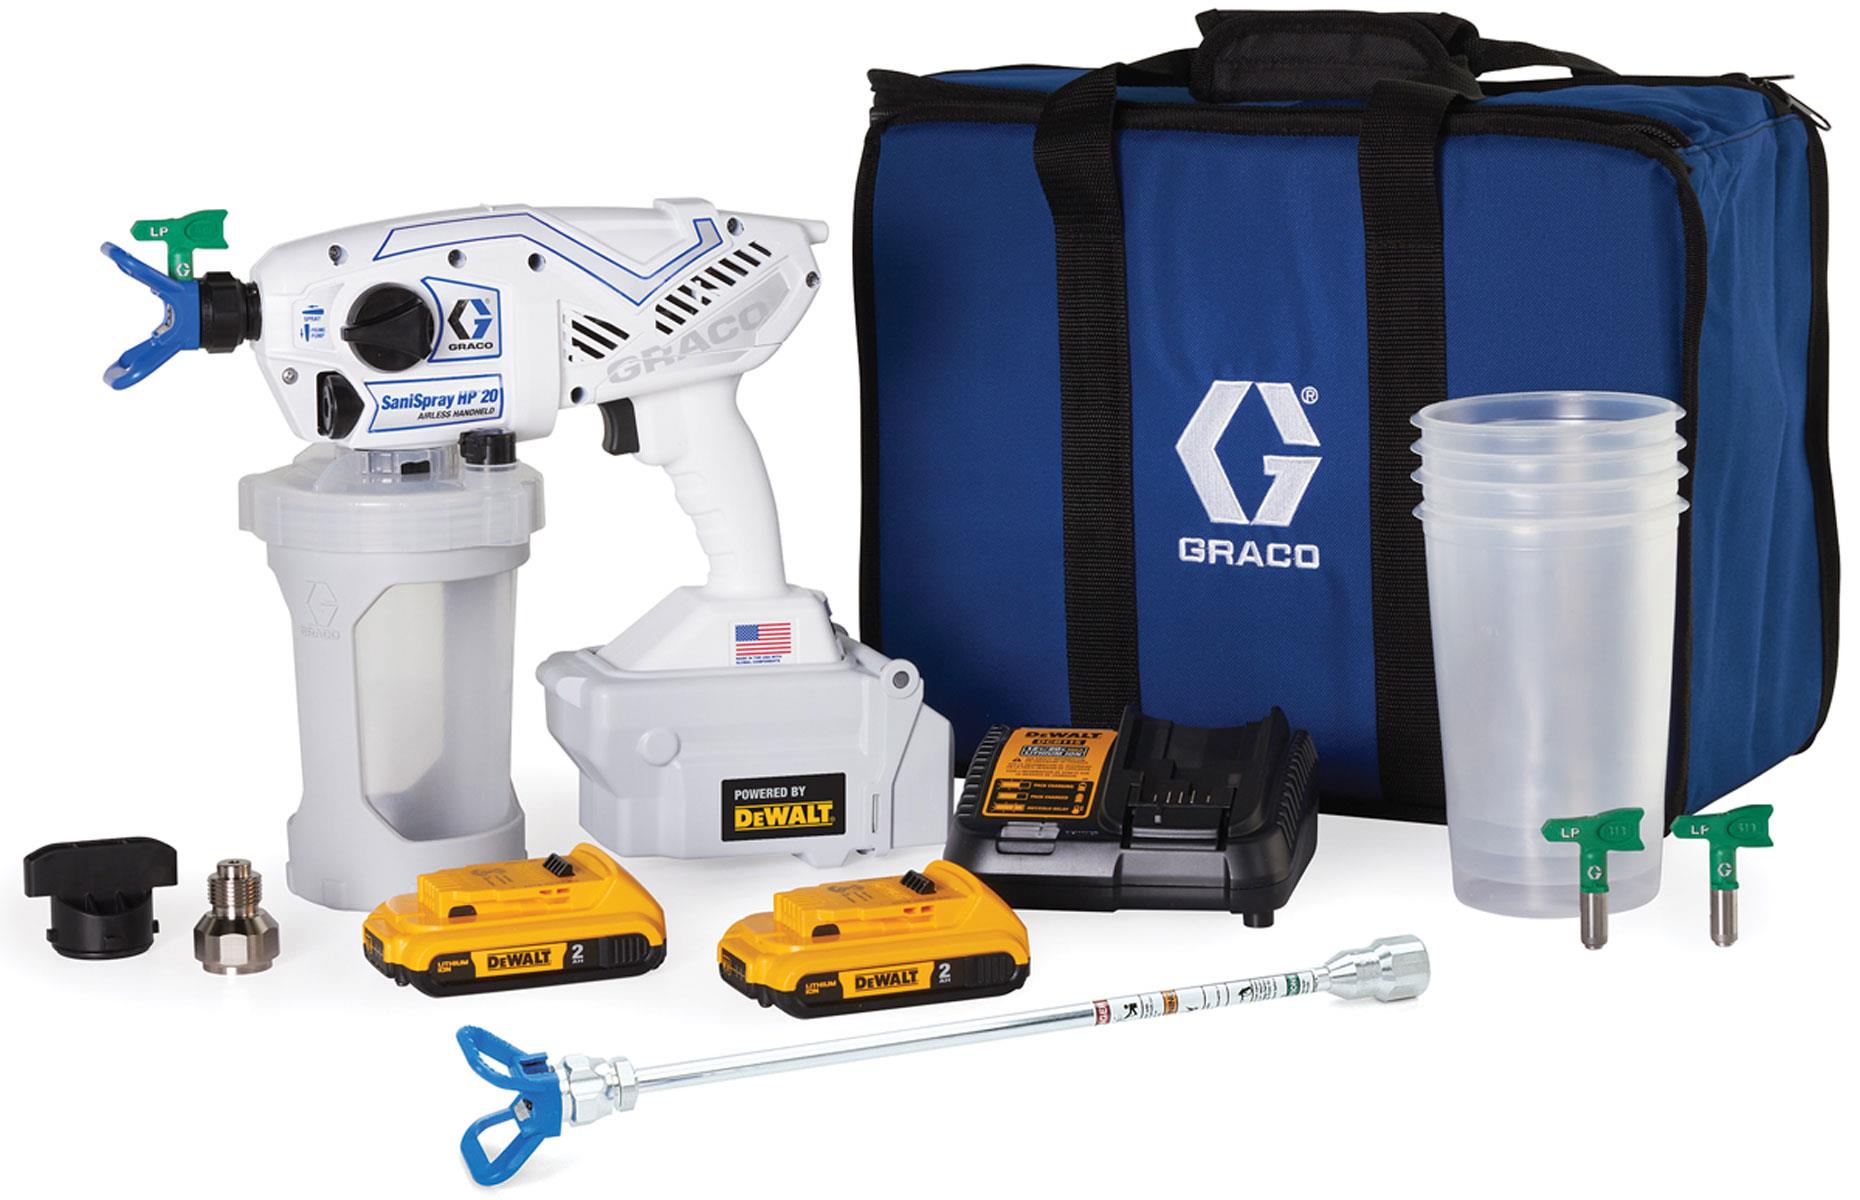 1994 – Graco: $1,000 invested then is worth $1.4 million (£1.1m) today